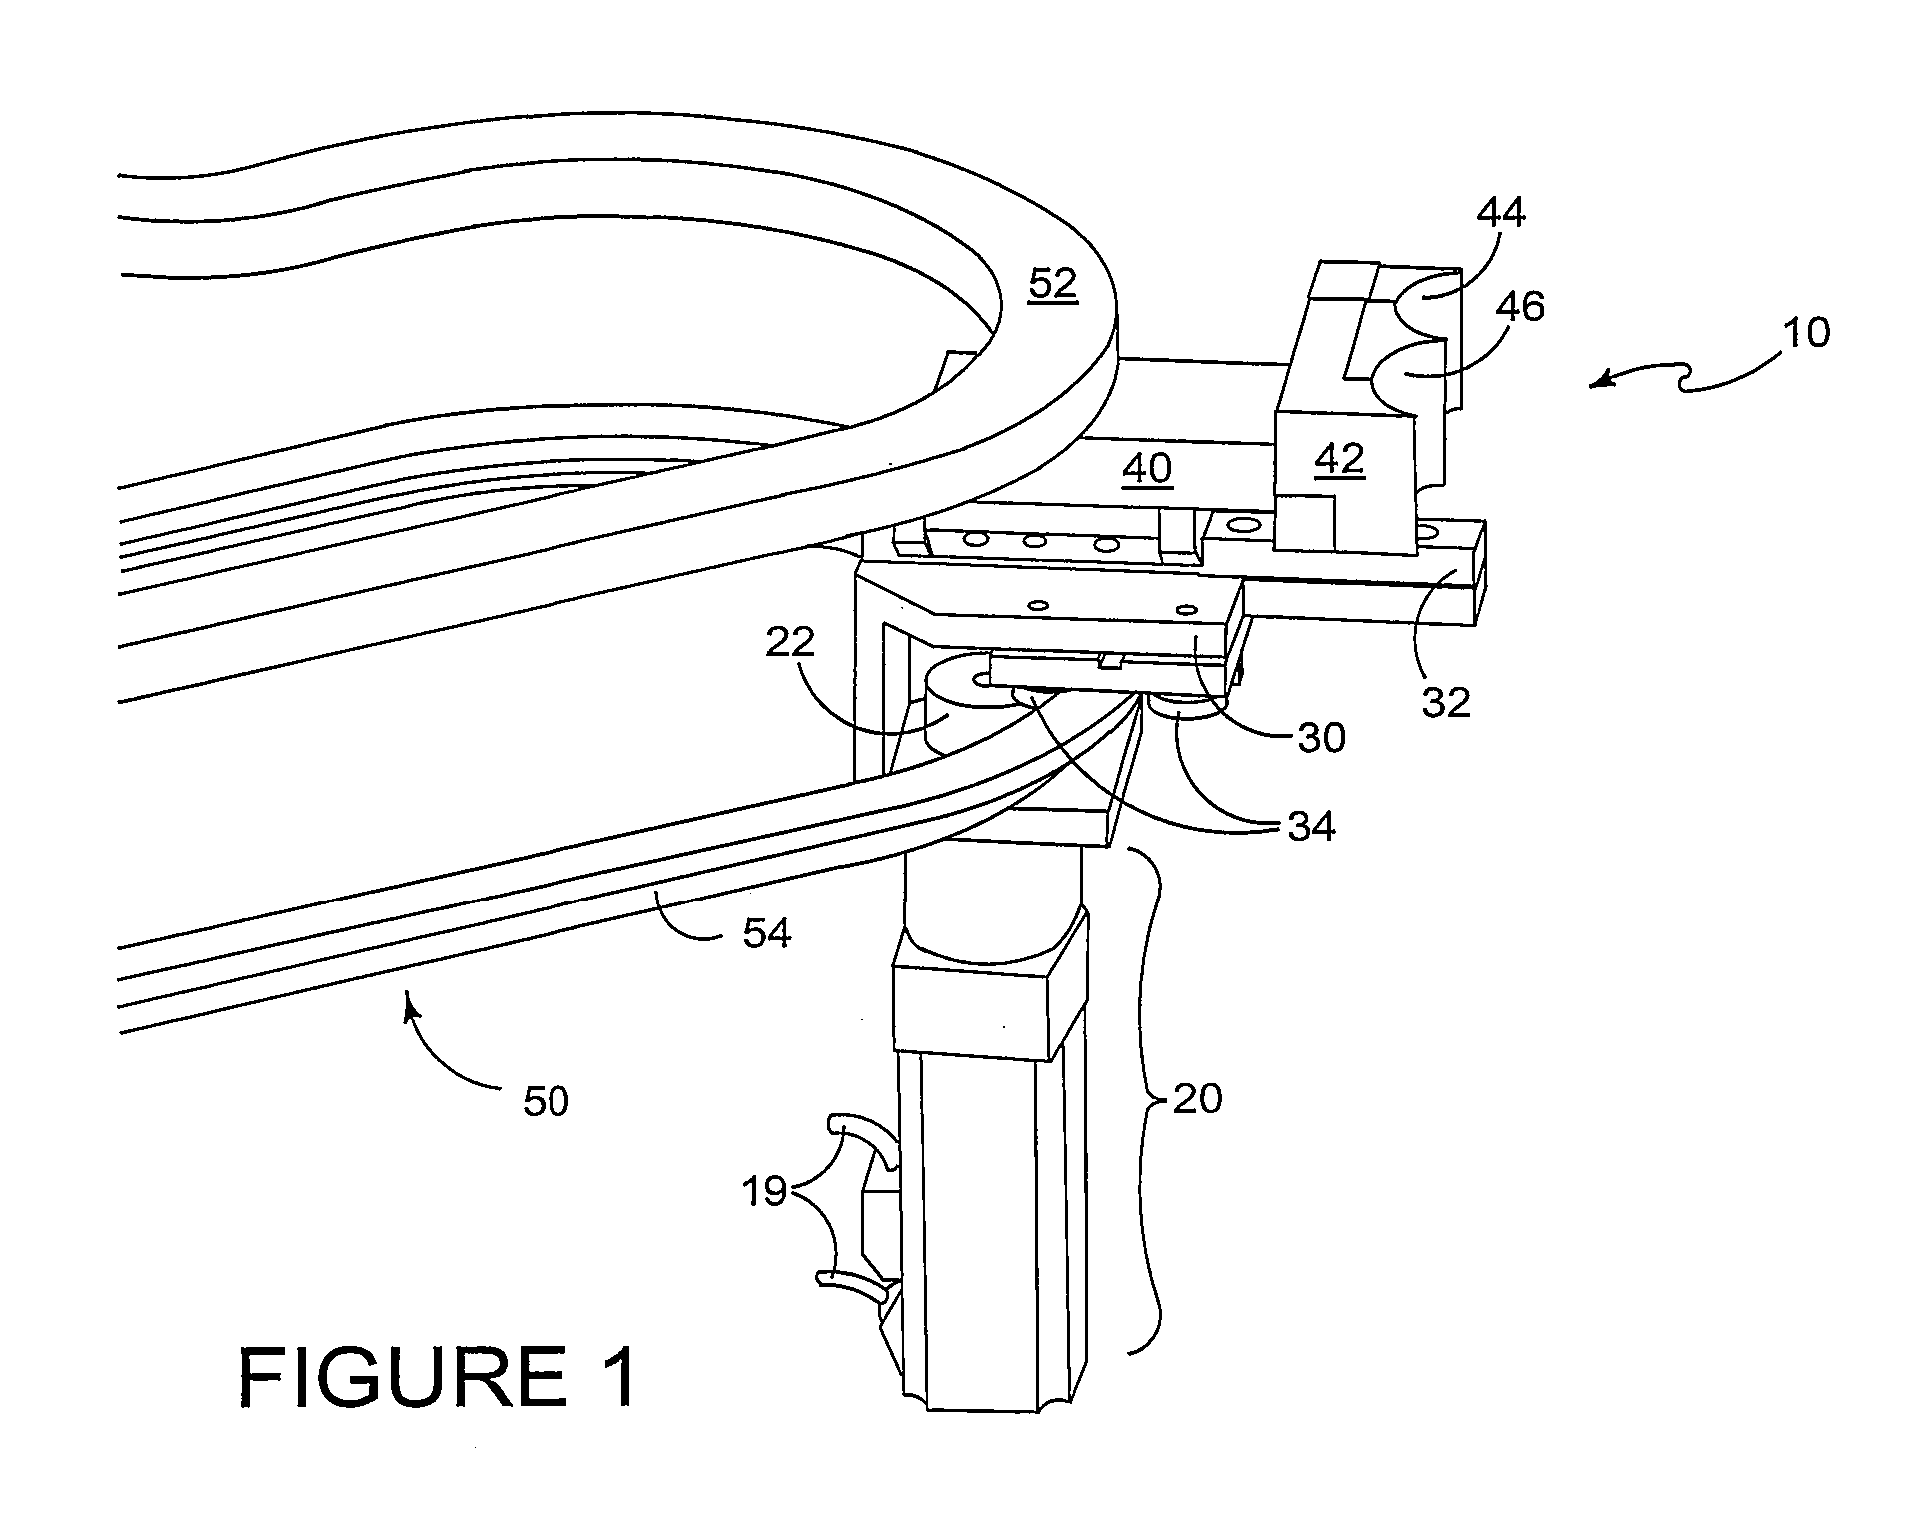 Metering apparatus with independent tool drive means